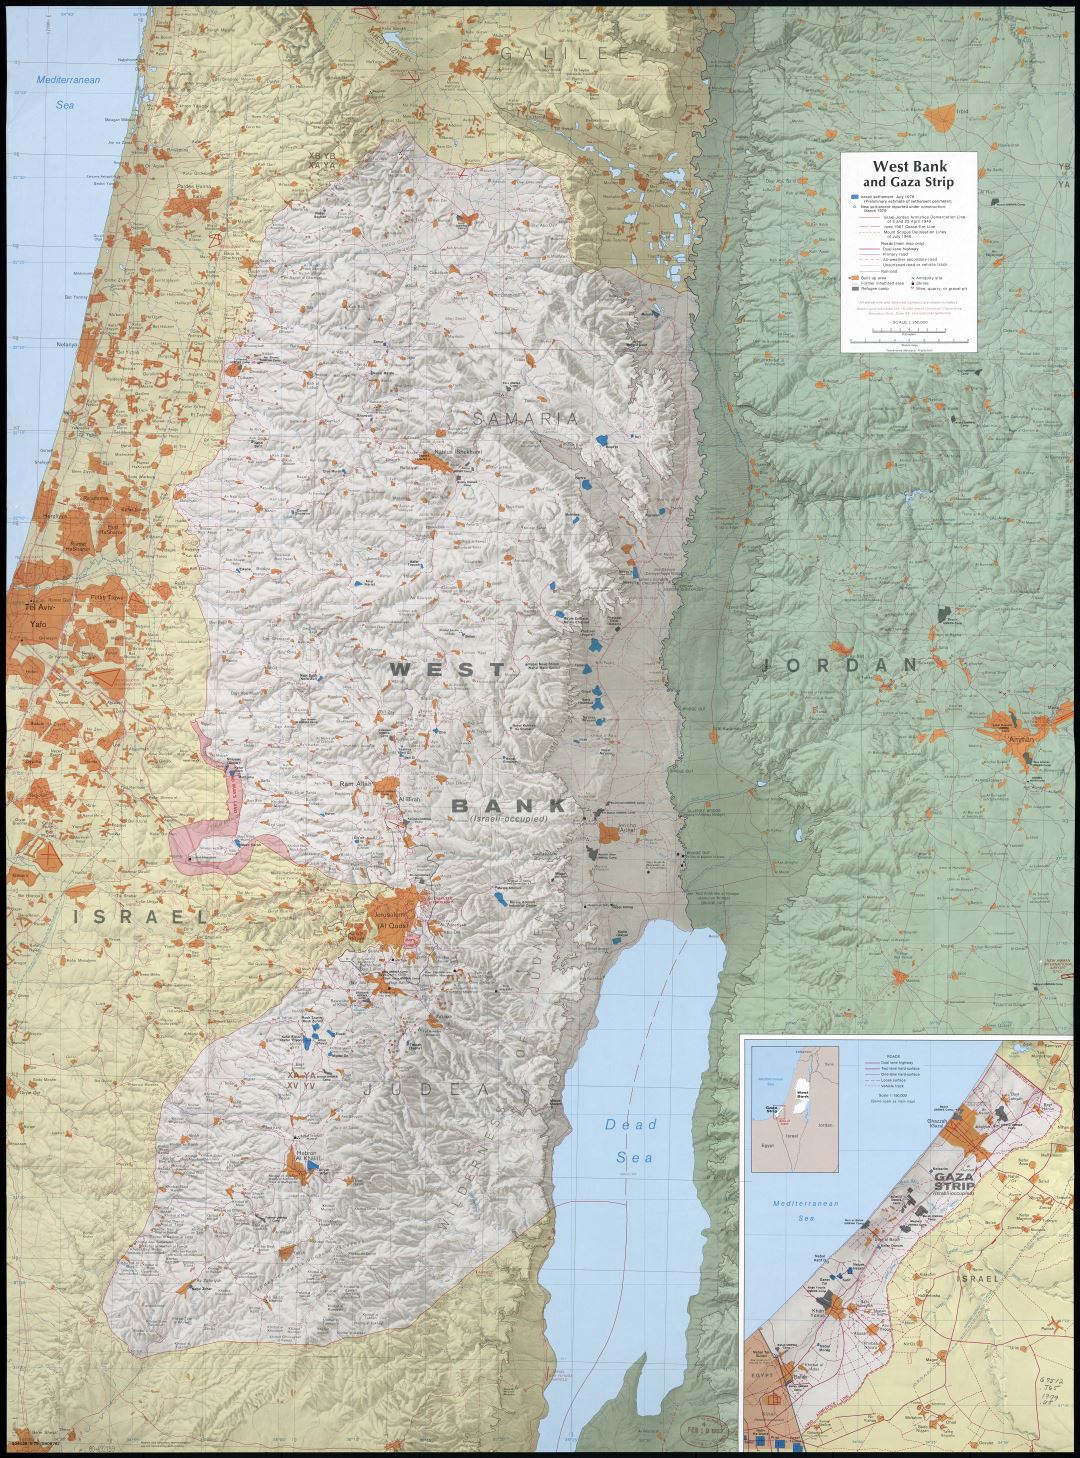 Large scale detailed map of West Bank and Gaza Strip with relief and other marks - 1979